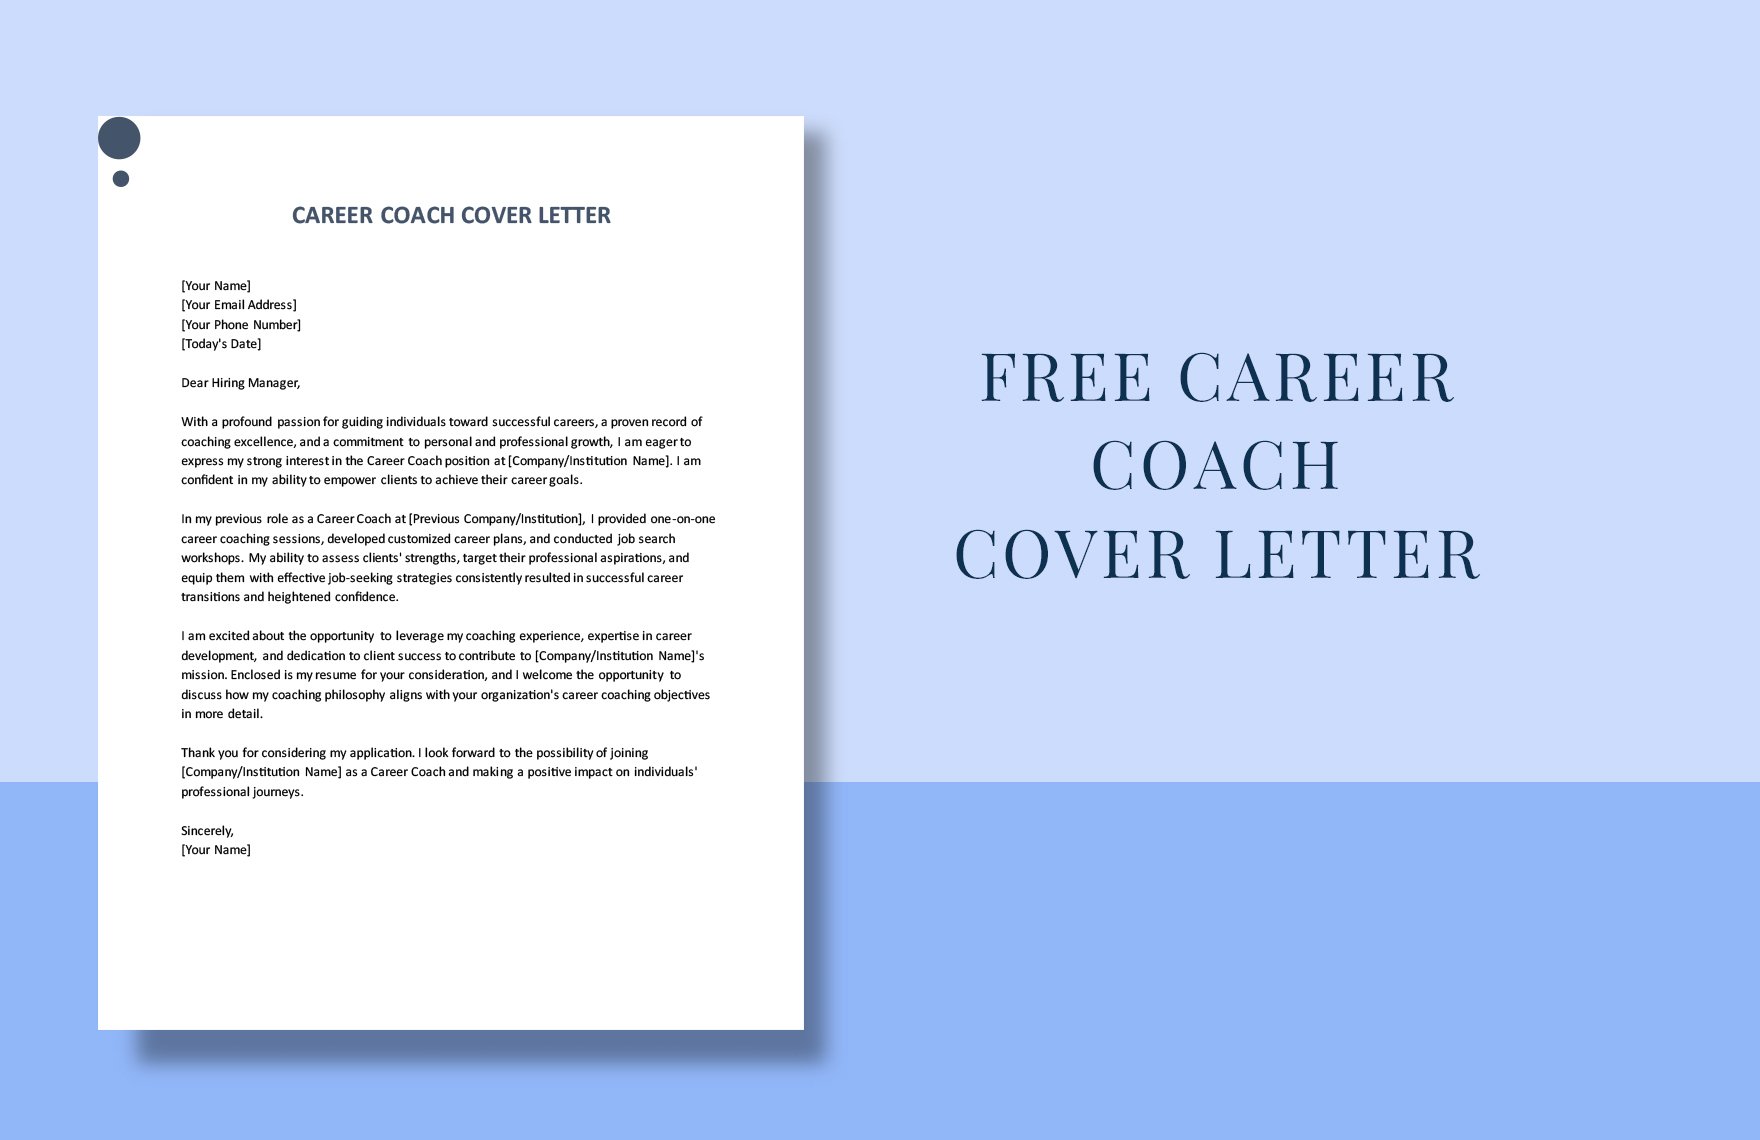 Career Coach Cover Letter